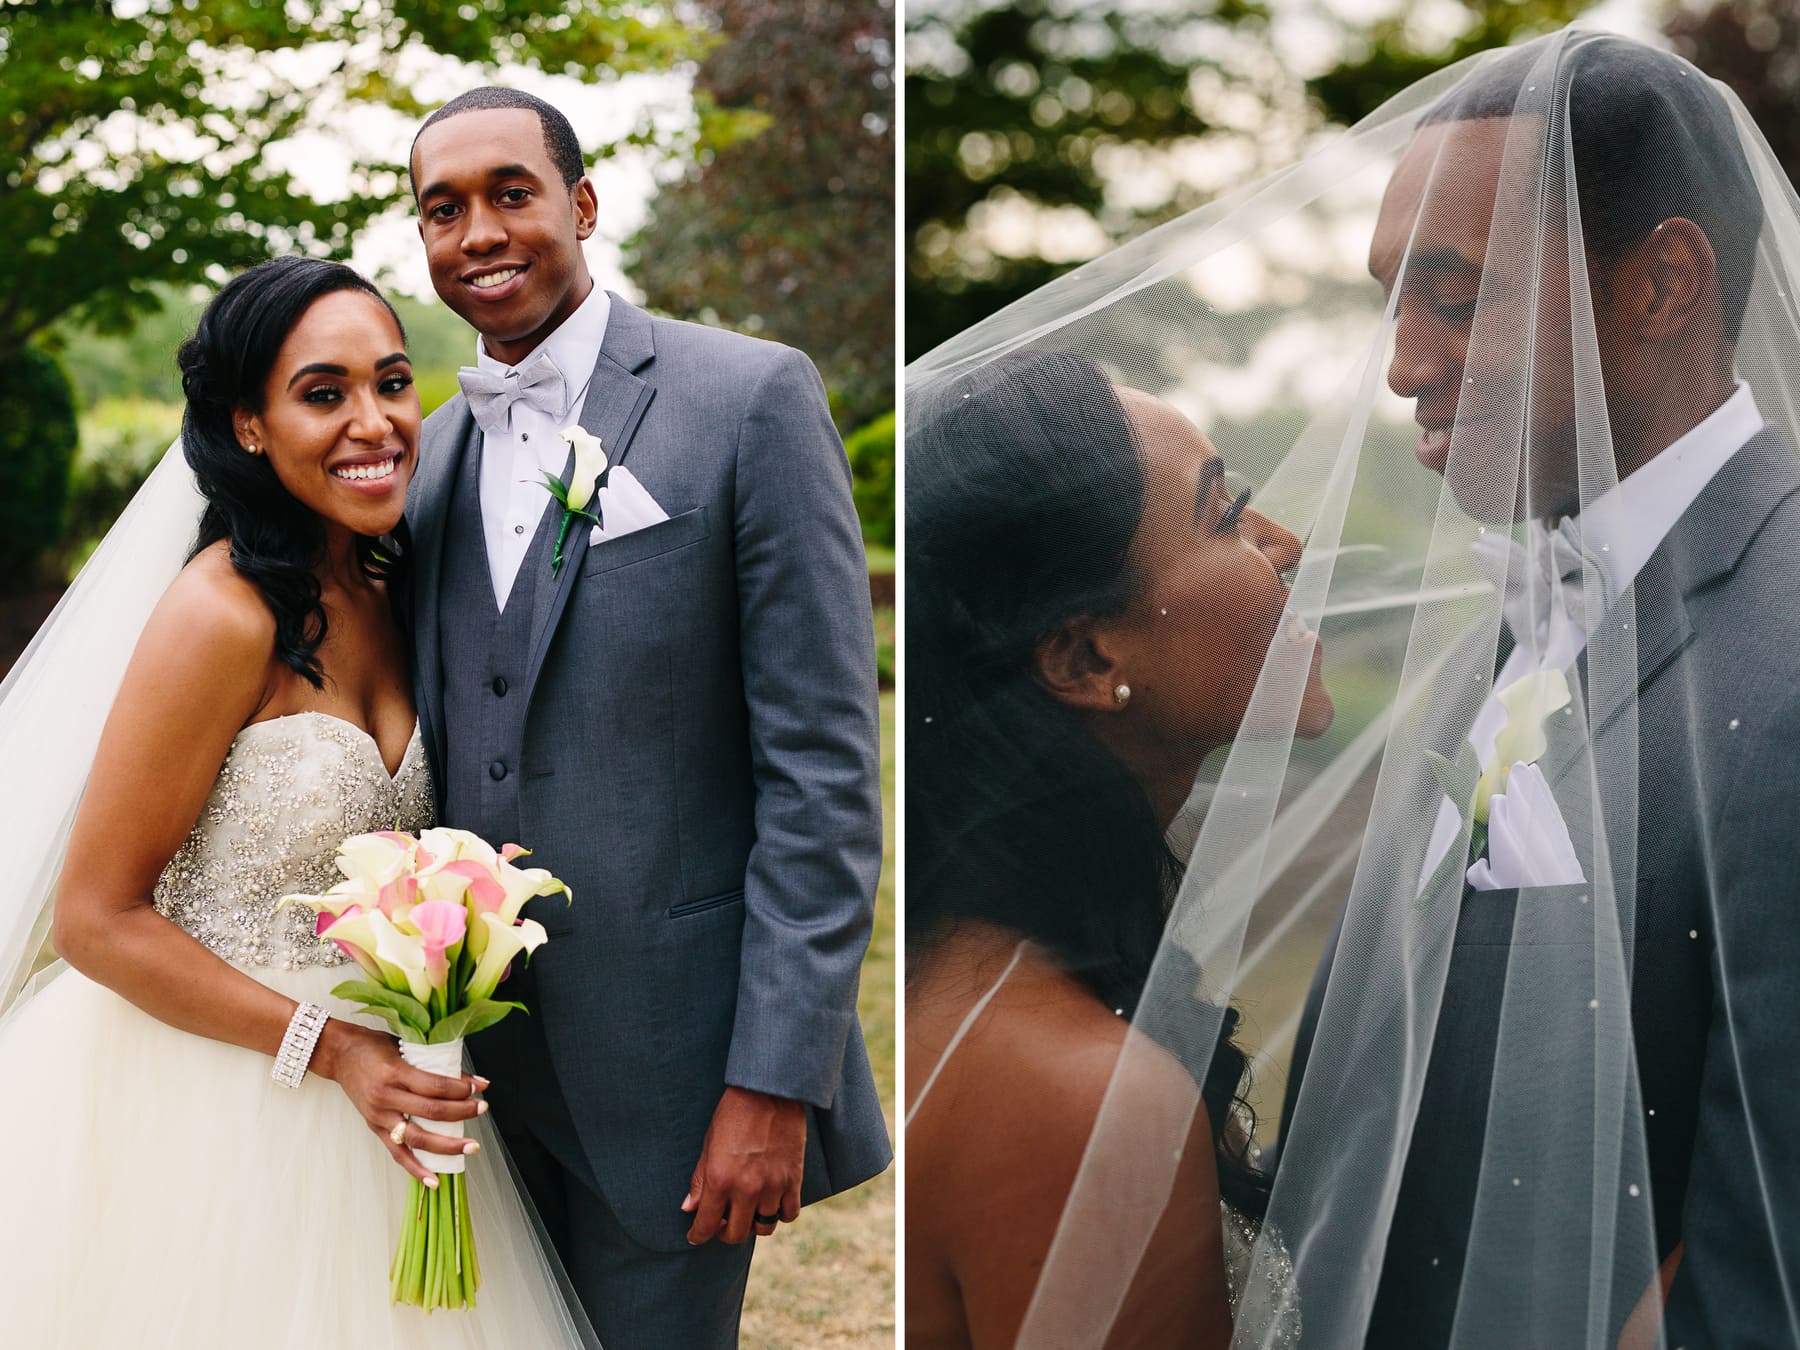 Desiree and Daniel's wedding at The Villa at Ridder Country Club in East Bridgewater, MA | Kelly Benvenuto Photography | Boston Wedding Photographer